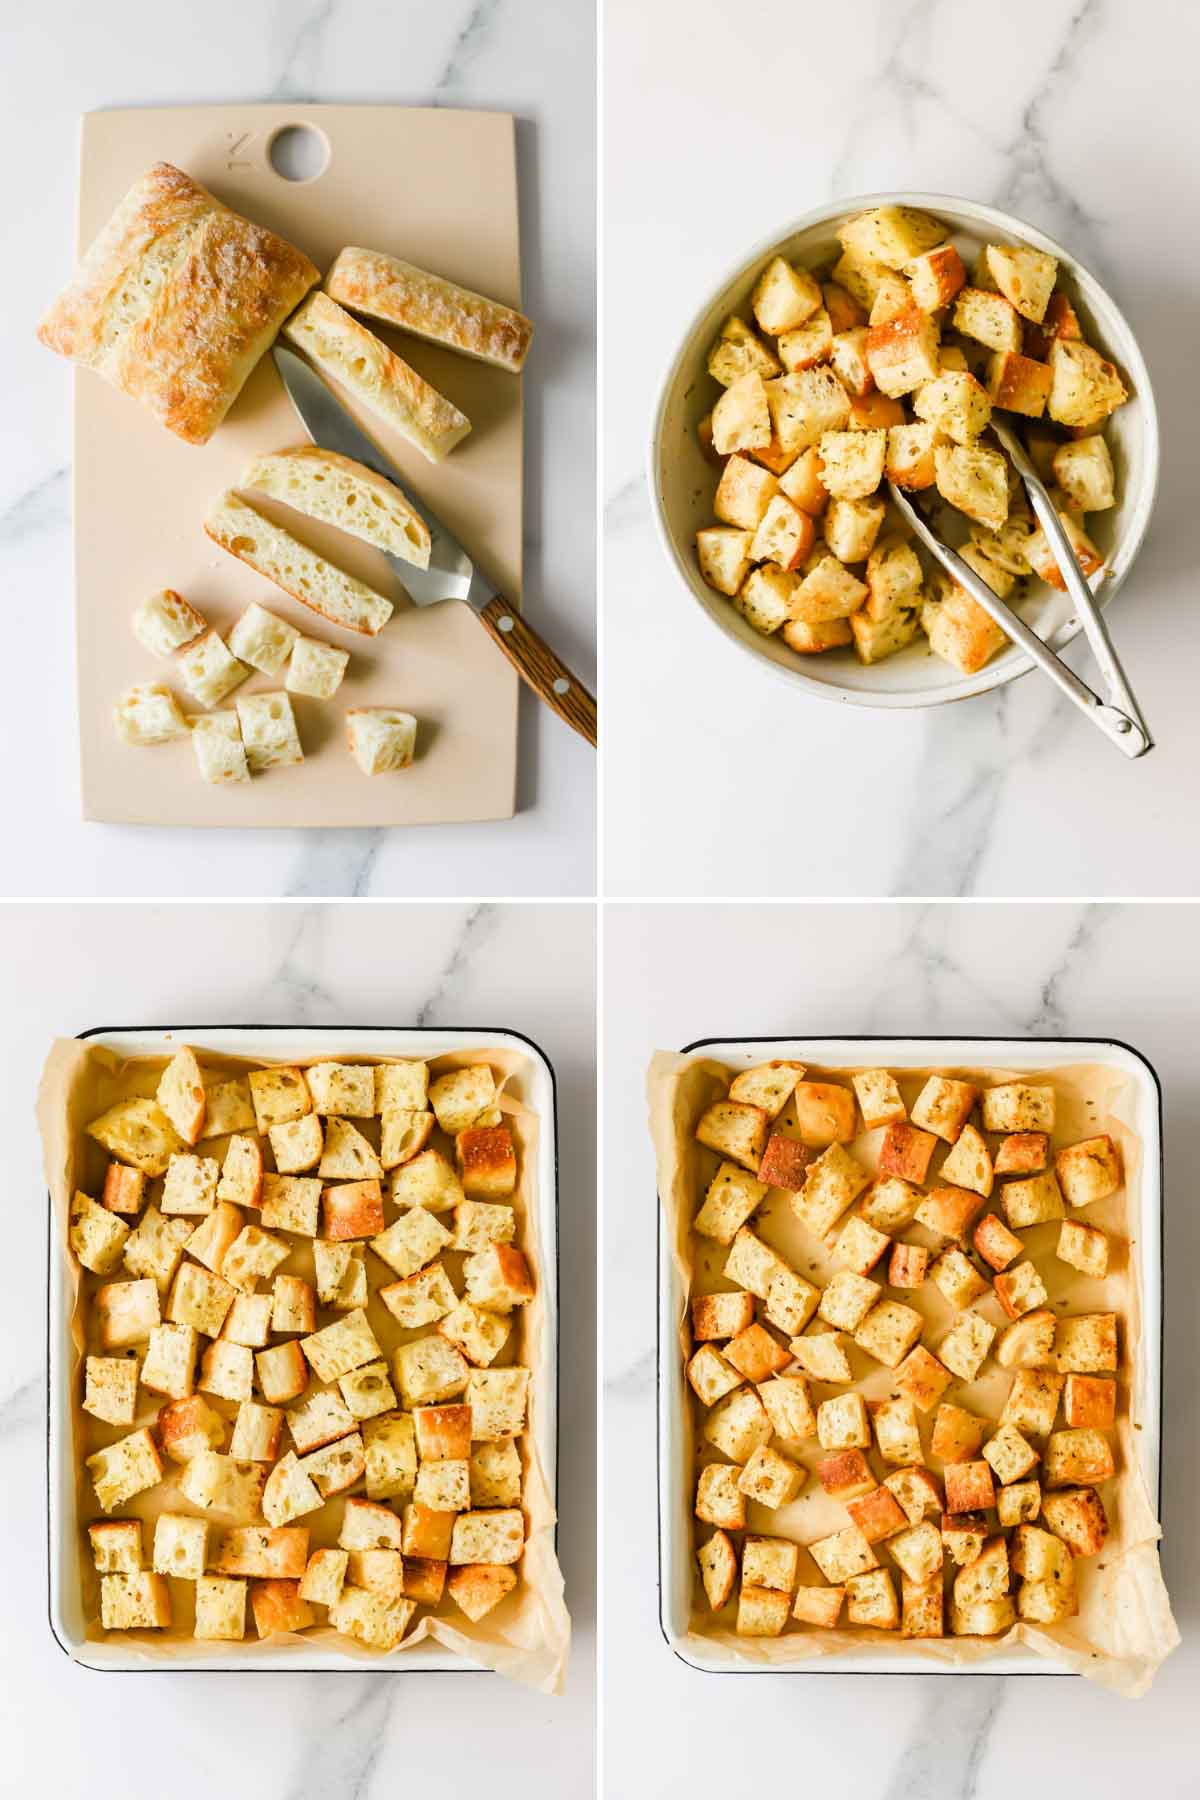 Four images showing the process of turning ciabatta bread into croutons.